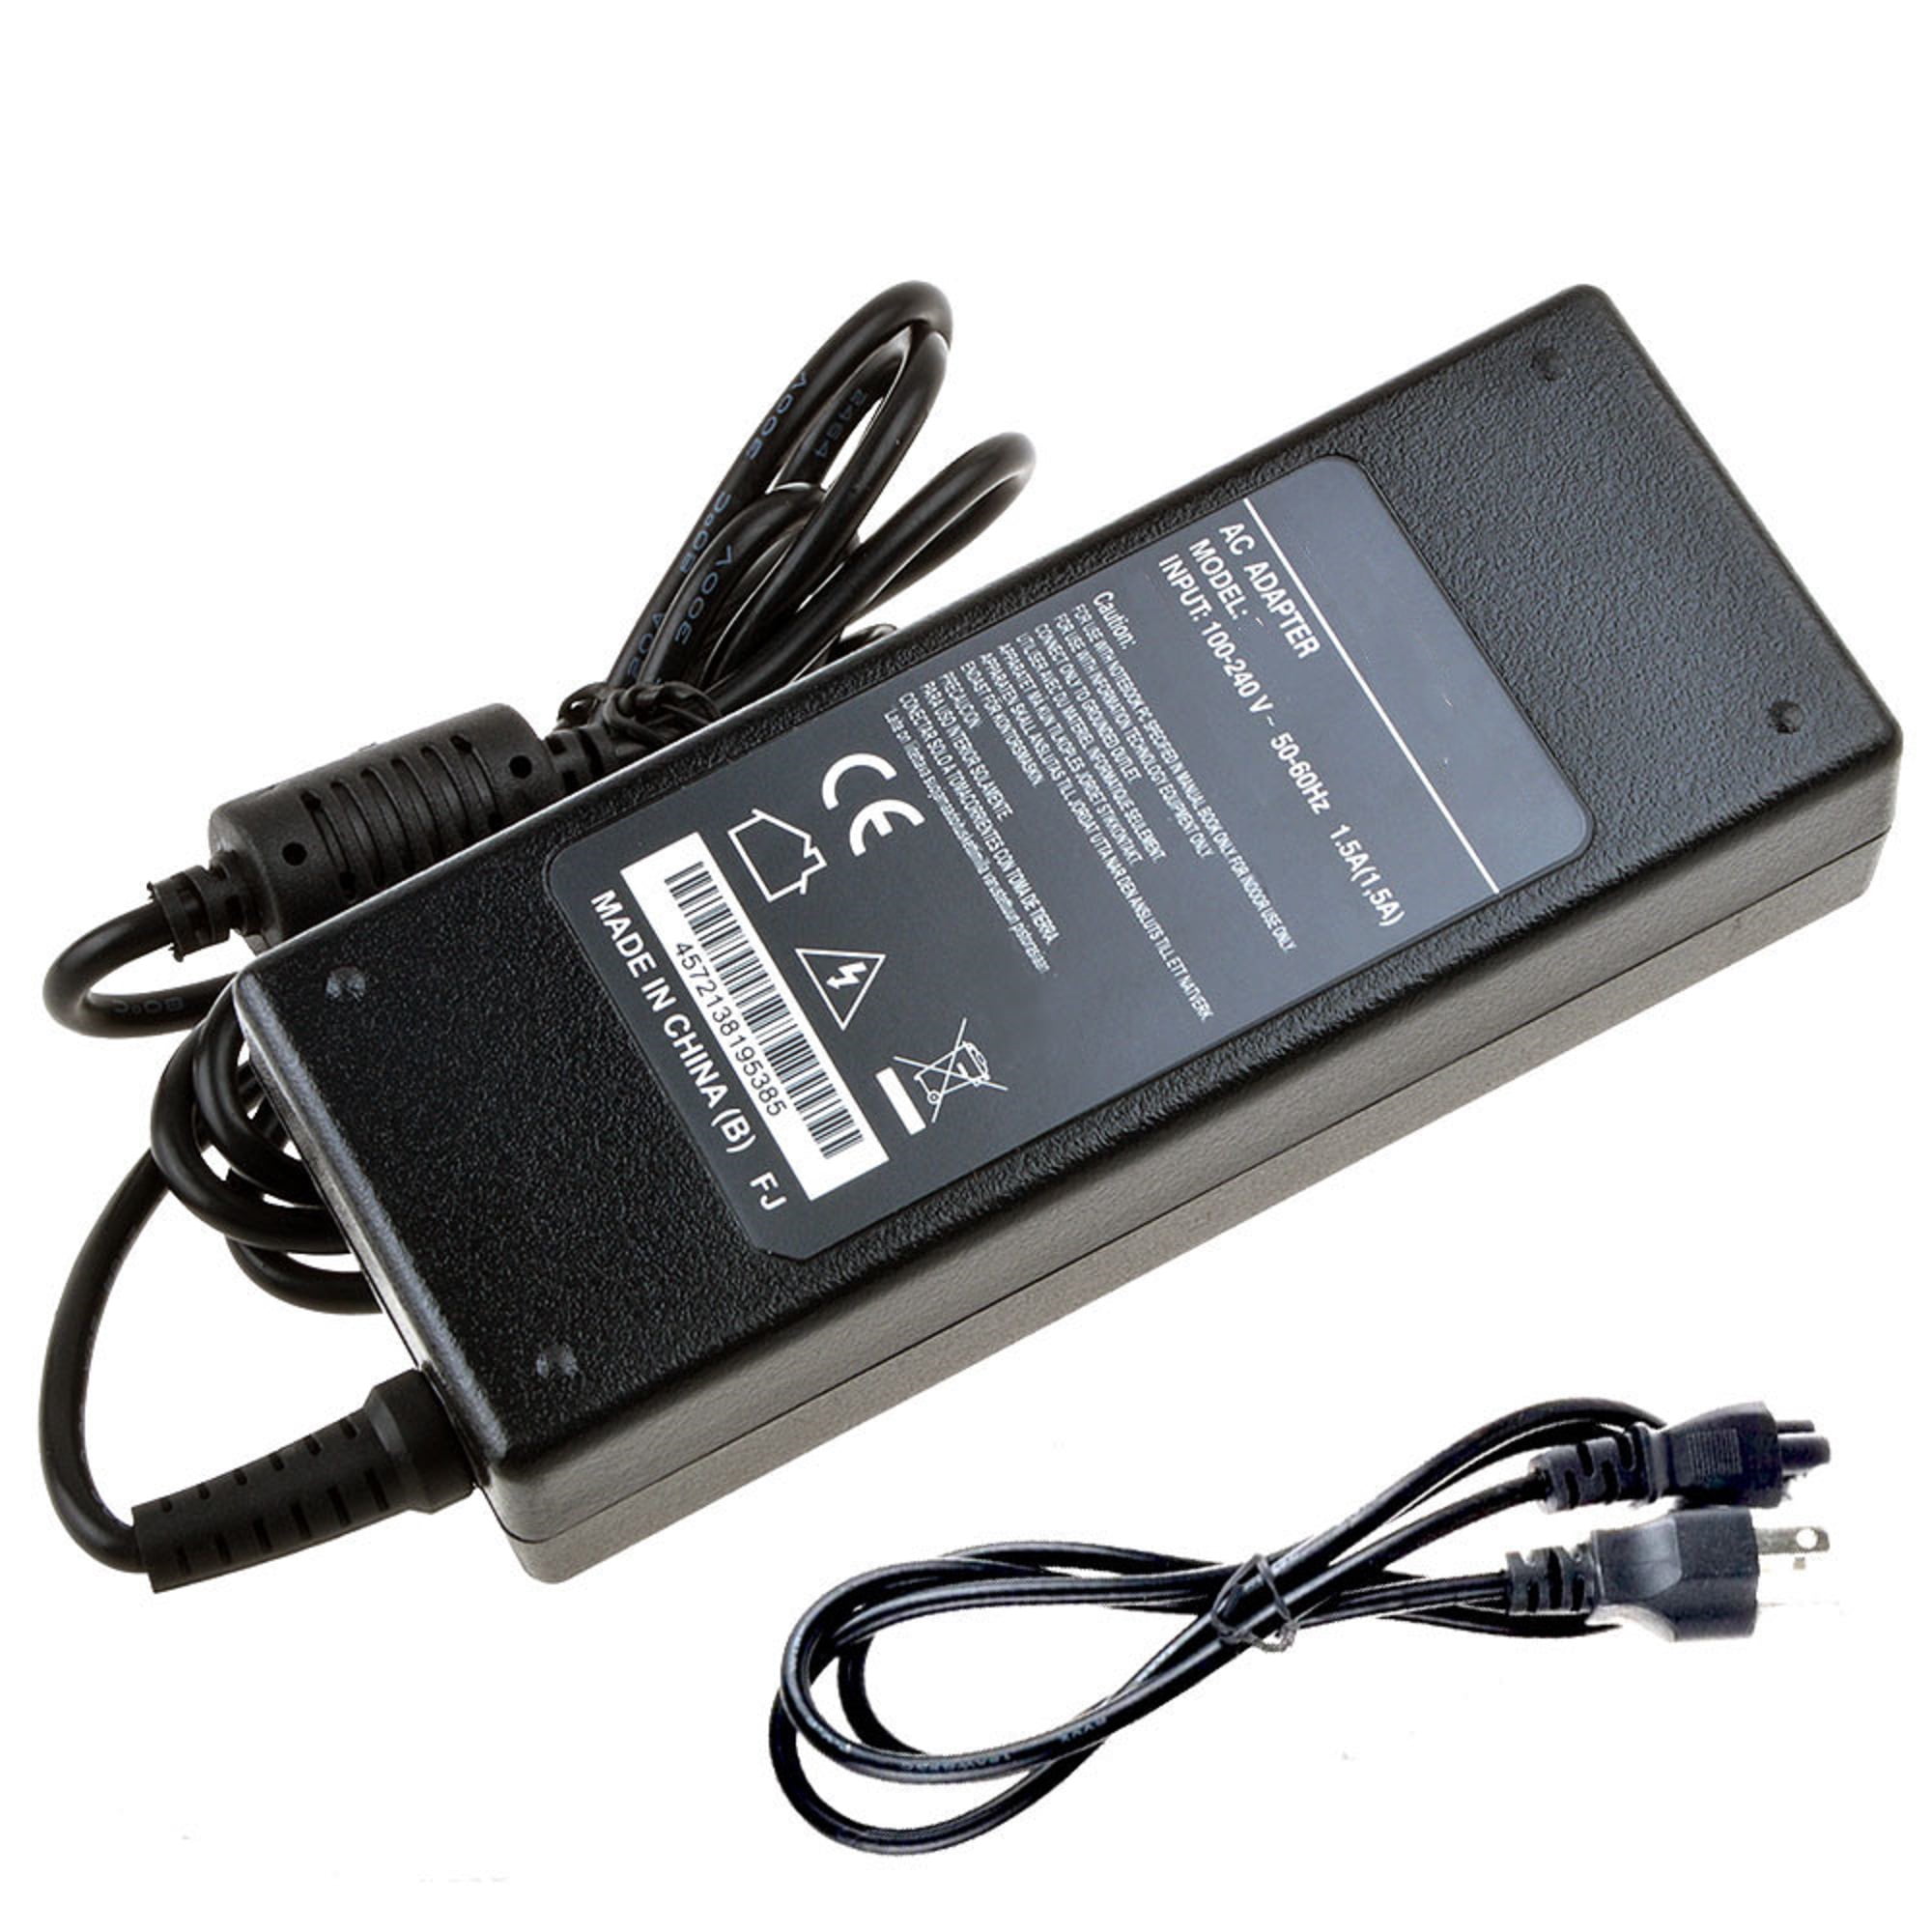 K-MAINS 6A Switching Power Supply Charger 15V6A 5.5*2.5/2.1mm 90W AC DC Adapter - Walmart.com